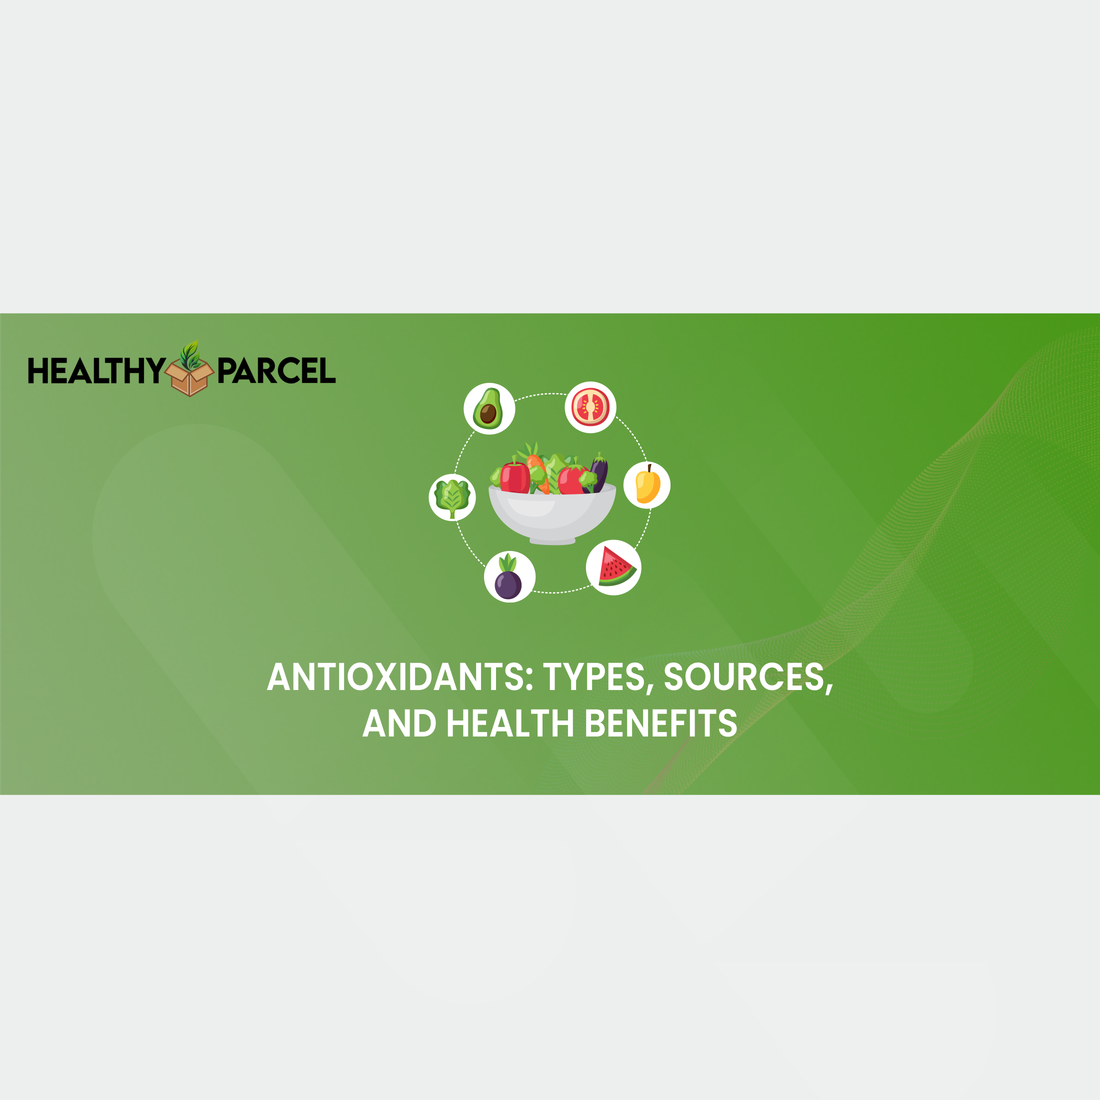 Antioxidants: Types, Sources, and Health Benefits